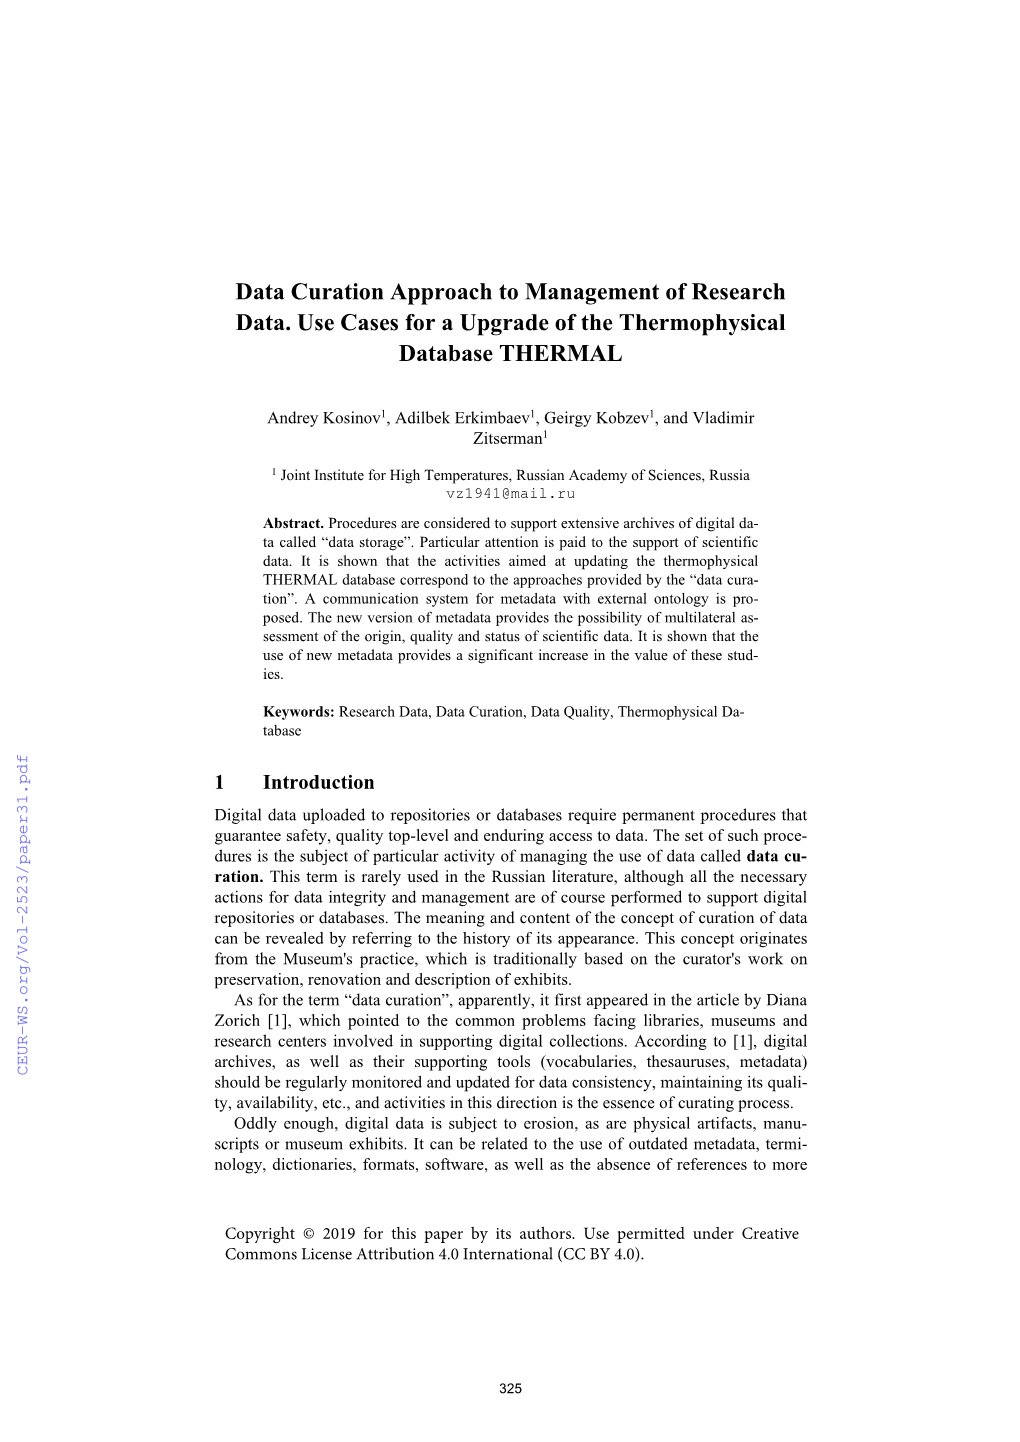 Data Curation Approach to Management of Research Data